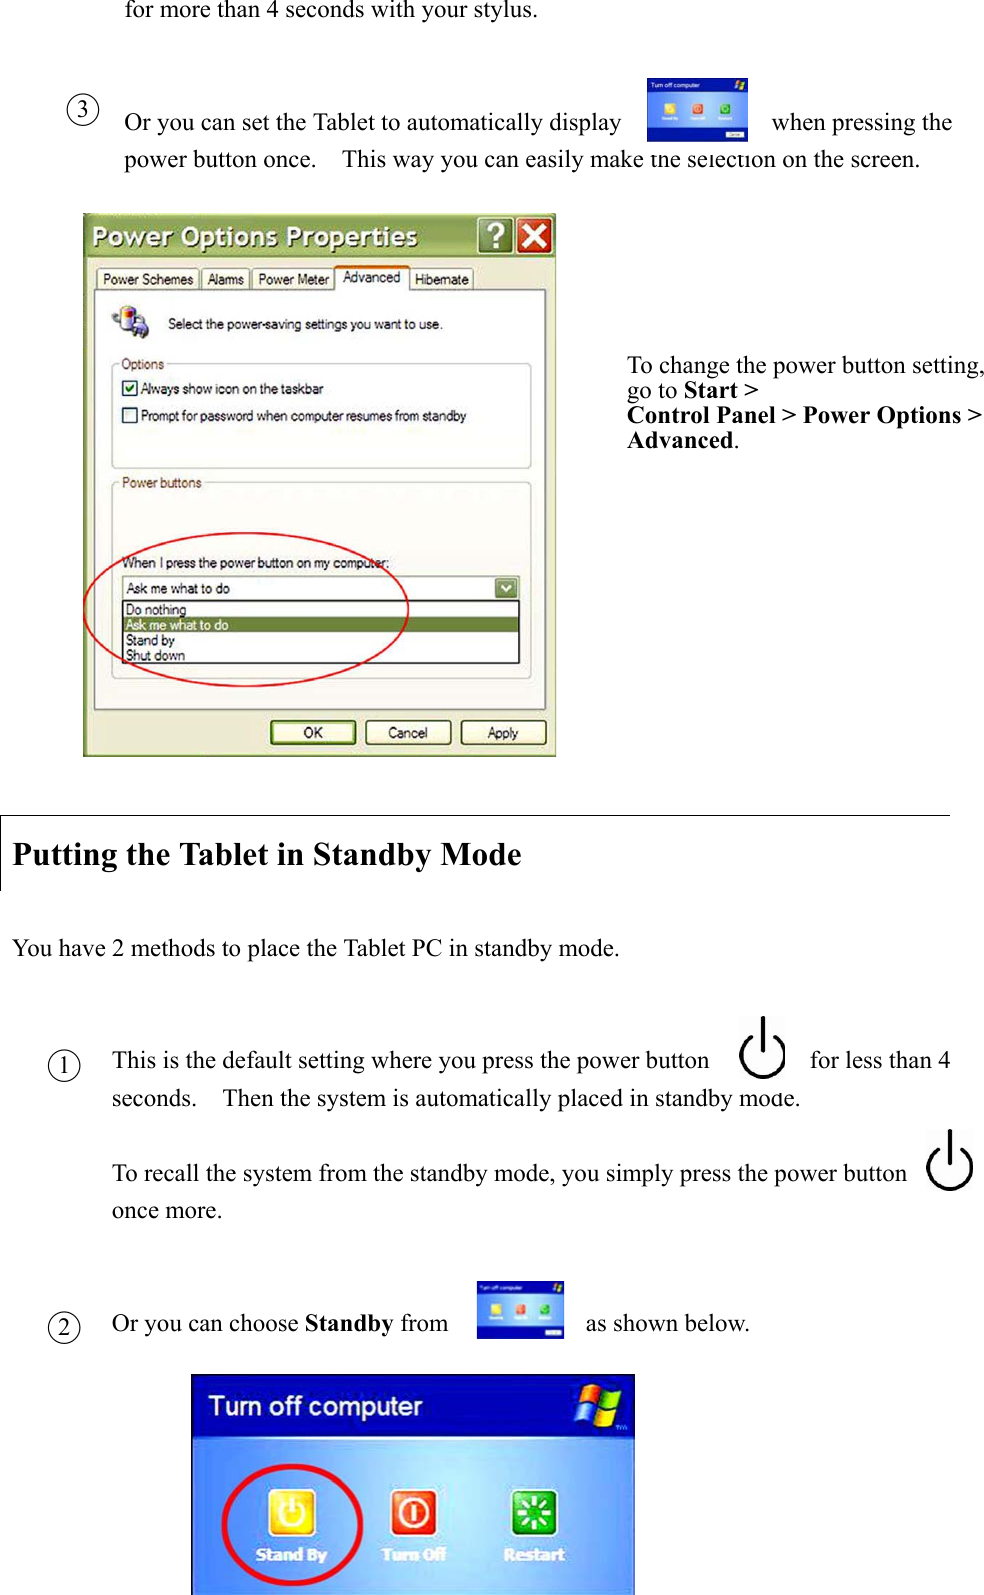 for more than 4 seconds with your stylus. Or you can set the Tablet to automatically display            when pressing the power button once.    This way you can easily make the selection on the screen.     Putting the Tablet in Standby Mode You have 2 methods to place the Tablet PC in standby mode. This is the default setting where you press the power button                for less than 4 seconds.    Then the system is automatically placed in standby mode.     To recall the system from the standby mode, you simply press the power button             once more.       Or you can choose Standby from           as shown below.         Ϥ3To change the power button setting, go to Start &gt;   Control Panel &gt; Power Options &gt; Advanced.Ϥ1Ϥ2